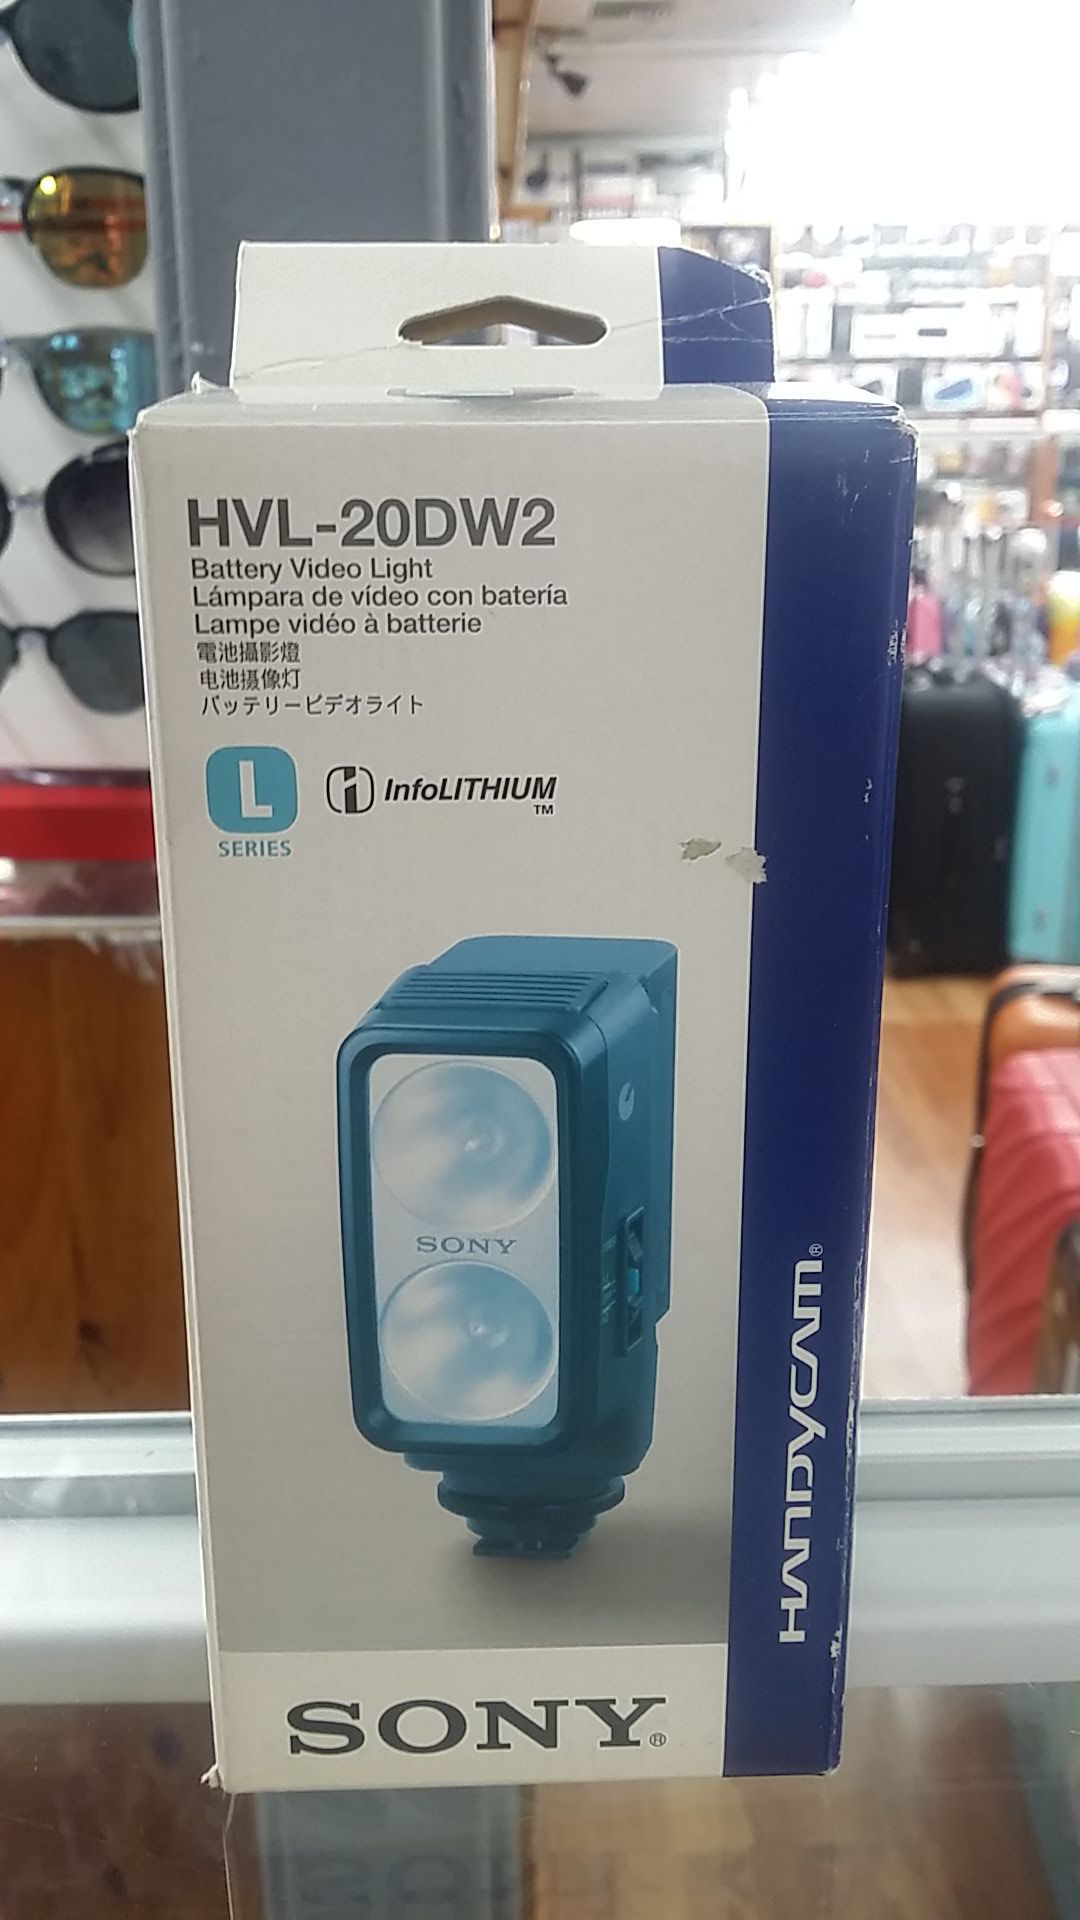 SONY HVL-20DW2 VIDEO LIGHT FOR USE WITH DIGITAL VIDEO CAMCORDER AND DIGITAL CAMERA!!!